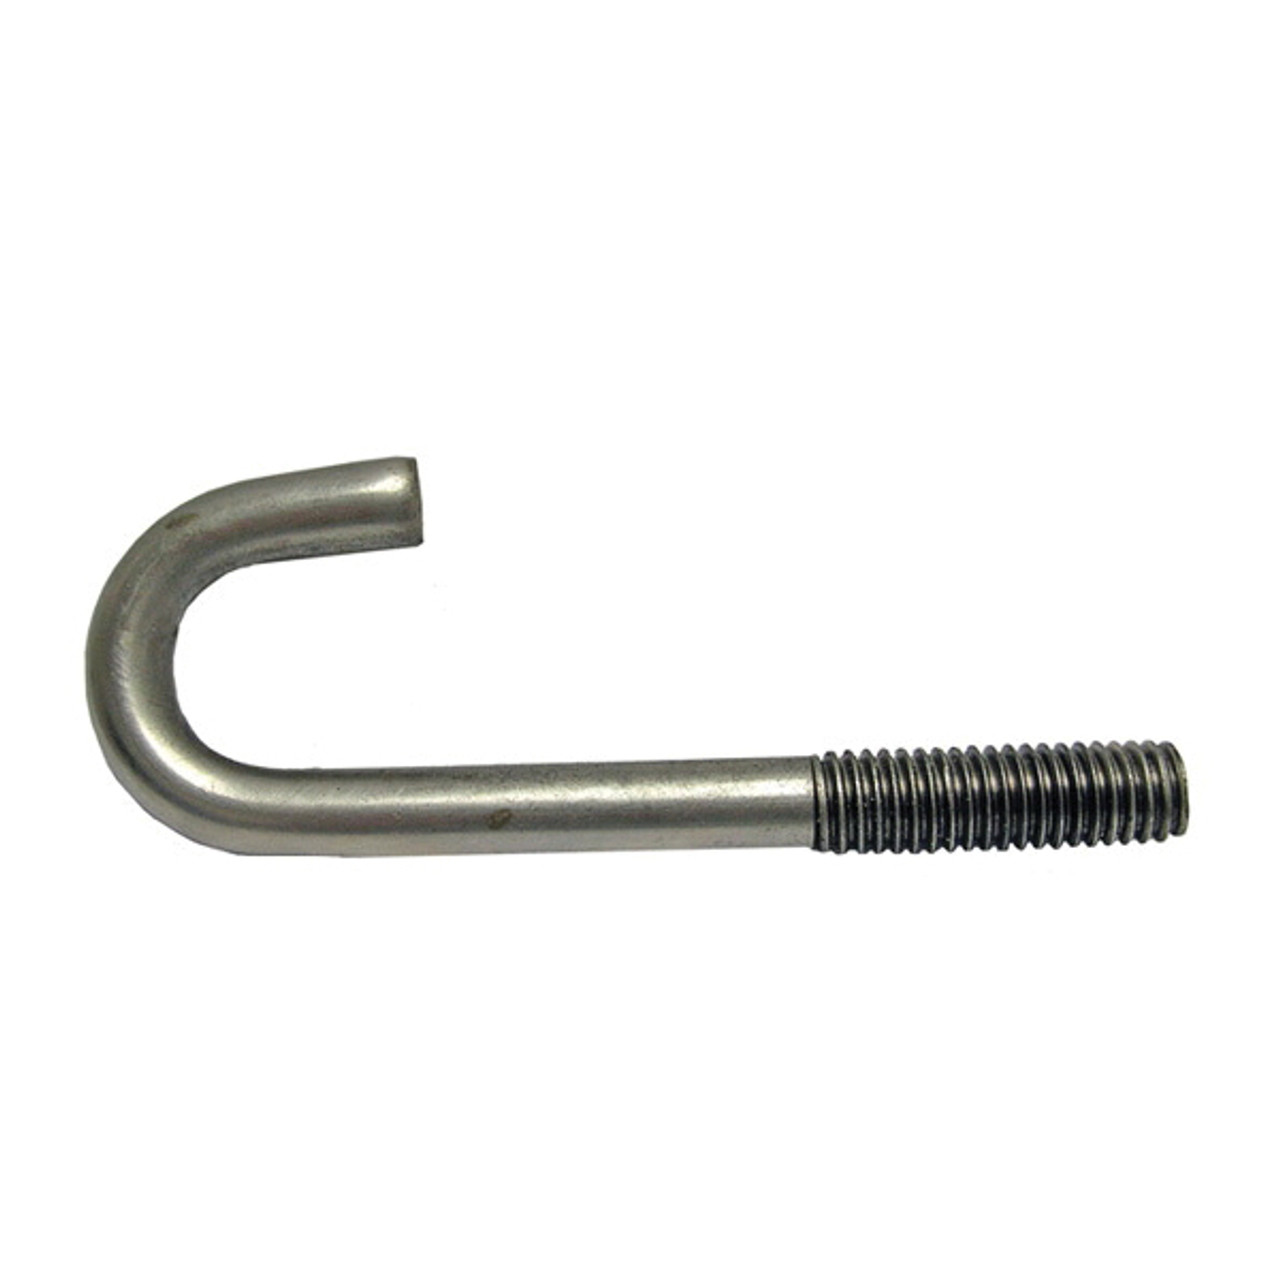 3/8 x 6 Inch Stainless Steel J Bolt